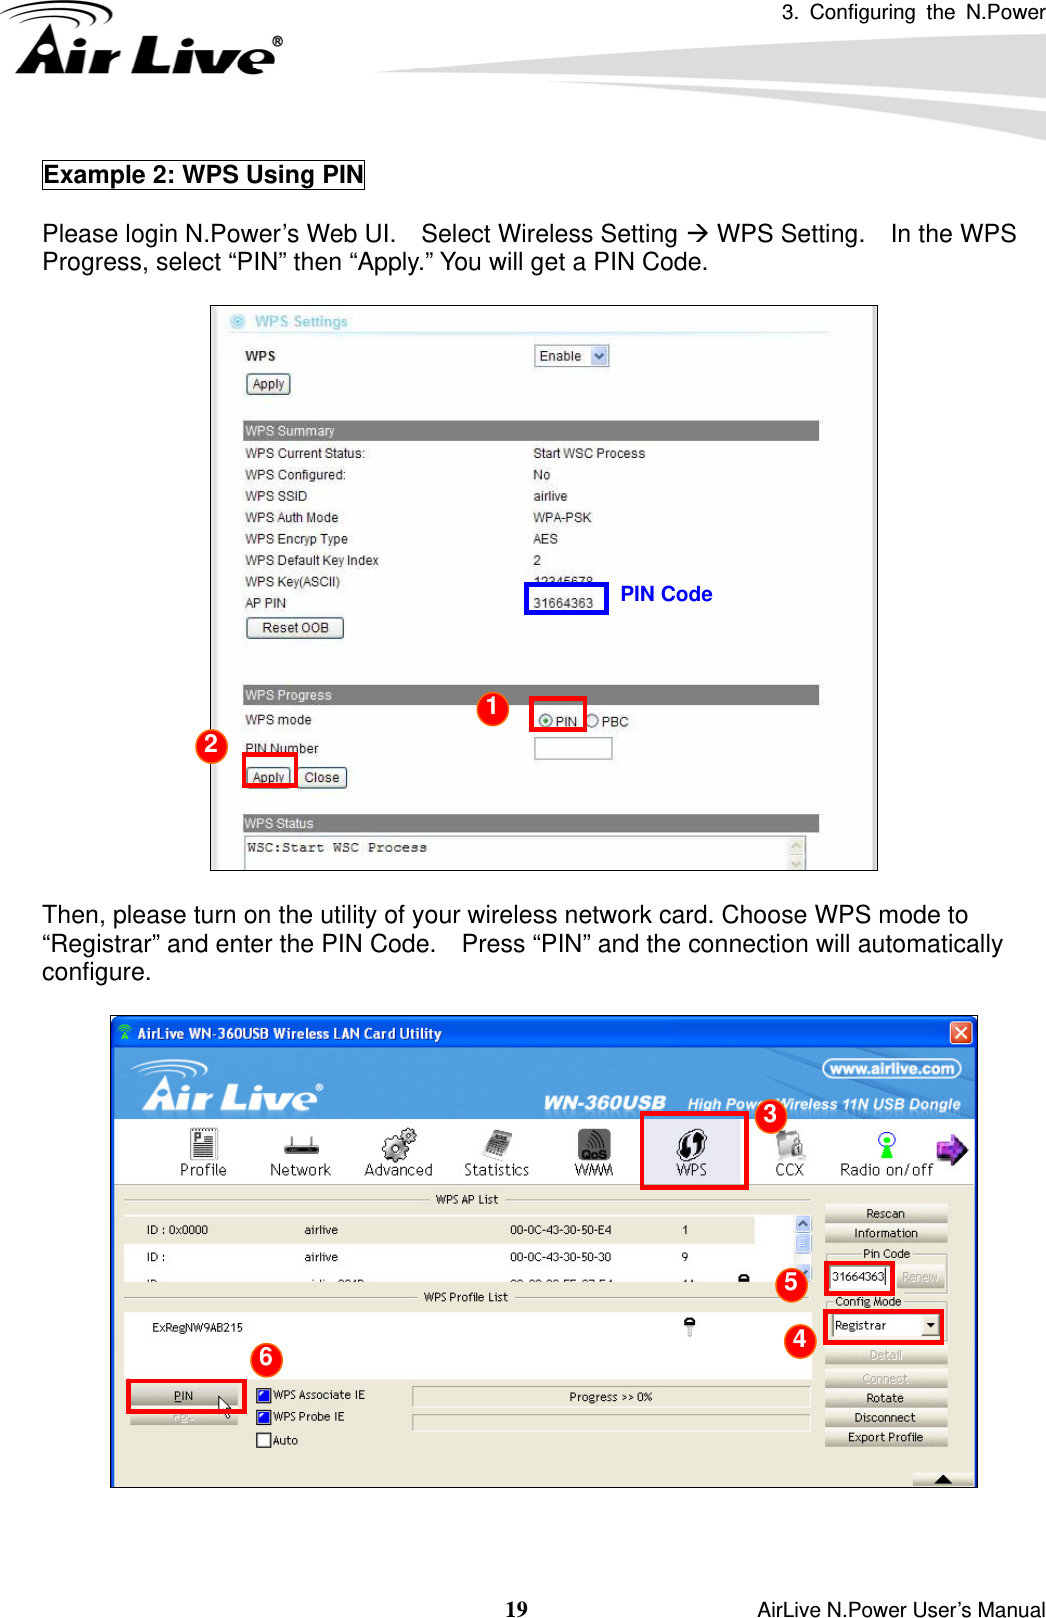 3. Configuring the N.Power  19                    AirLive N.Power User’s Manual Example 2: WPS Using PIN  Please login N.Power’s Web UI.    Select Wireless Setting Æ WPS Setting.    In the WPS Progress, select “PIN” then “Apply.” You will get a PIN Code.      Then, please turn on the utility of your wireless network card. Choose WPS mode to “Registrar” and enter the PIN Code.    Press “PIN” and the connection will automatically configure.    PIN Code 1 2  3 4 5 6 